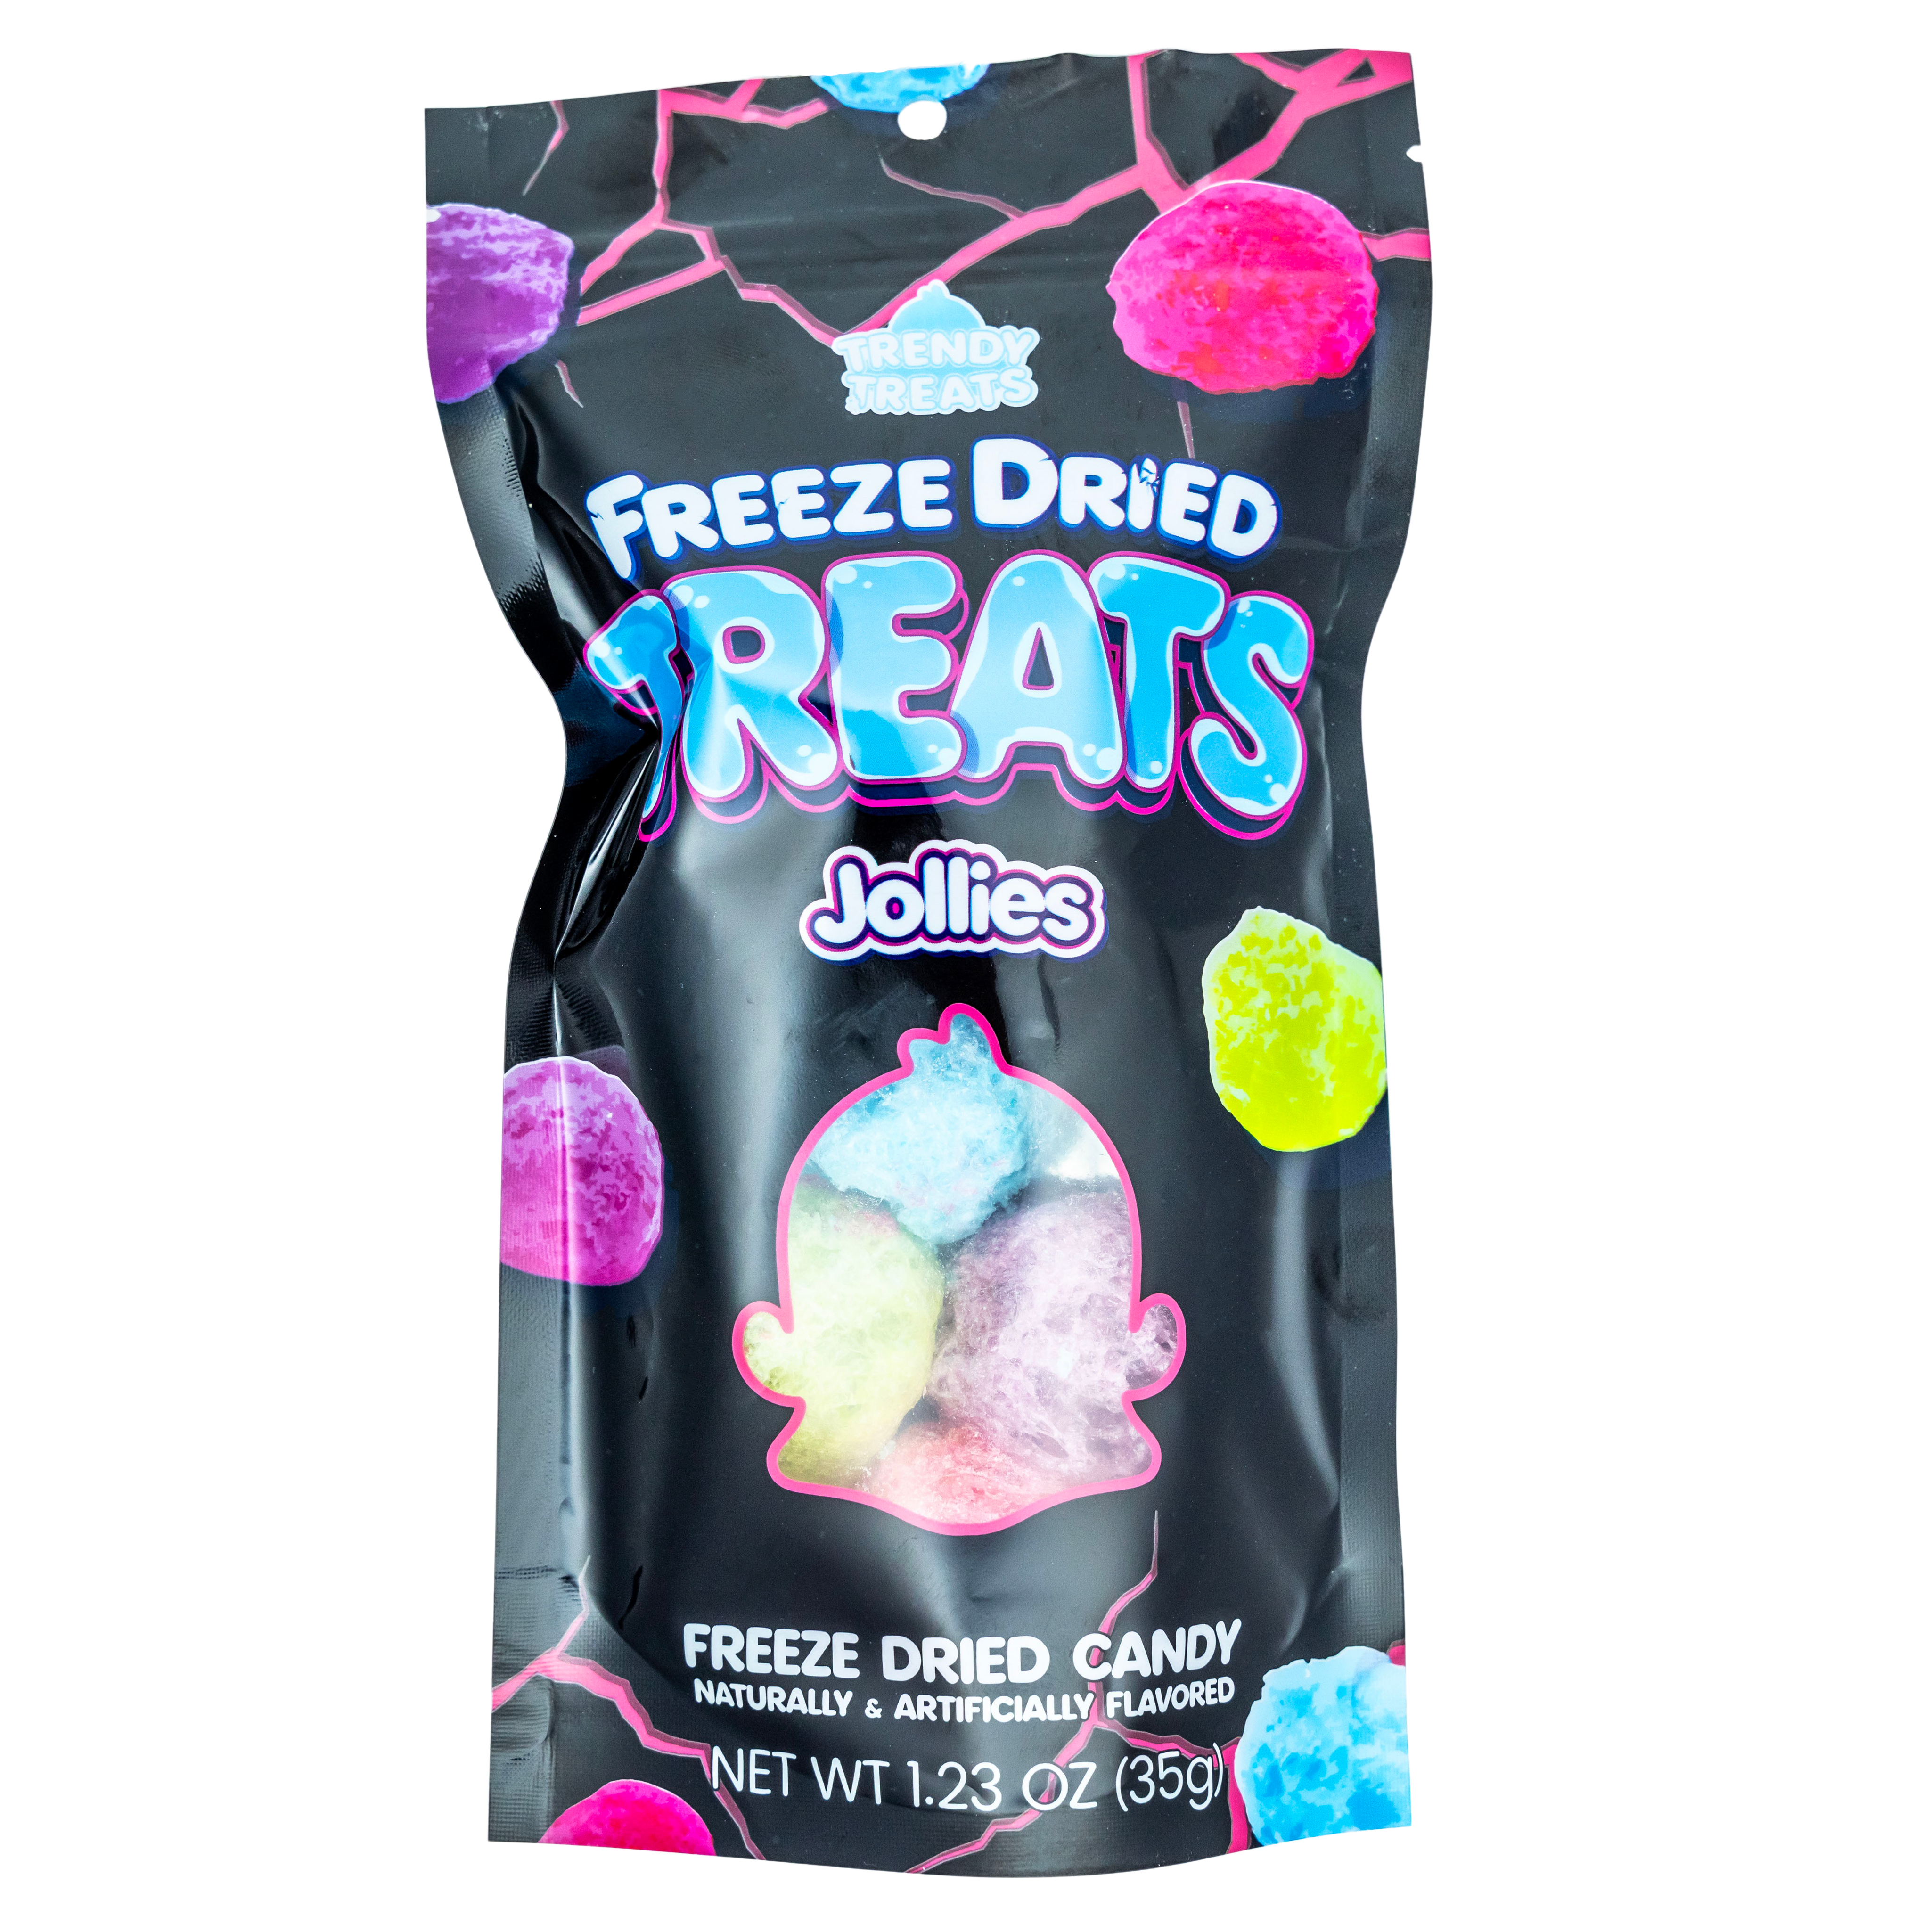 Trendy Treats Freeze Dried Jollies Fruit Flavored Candy